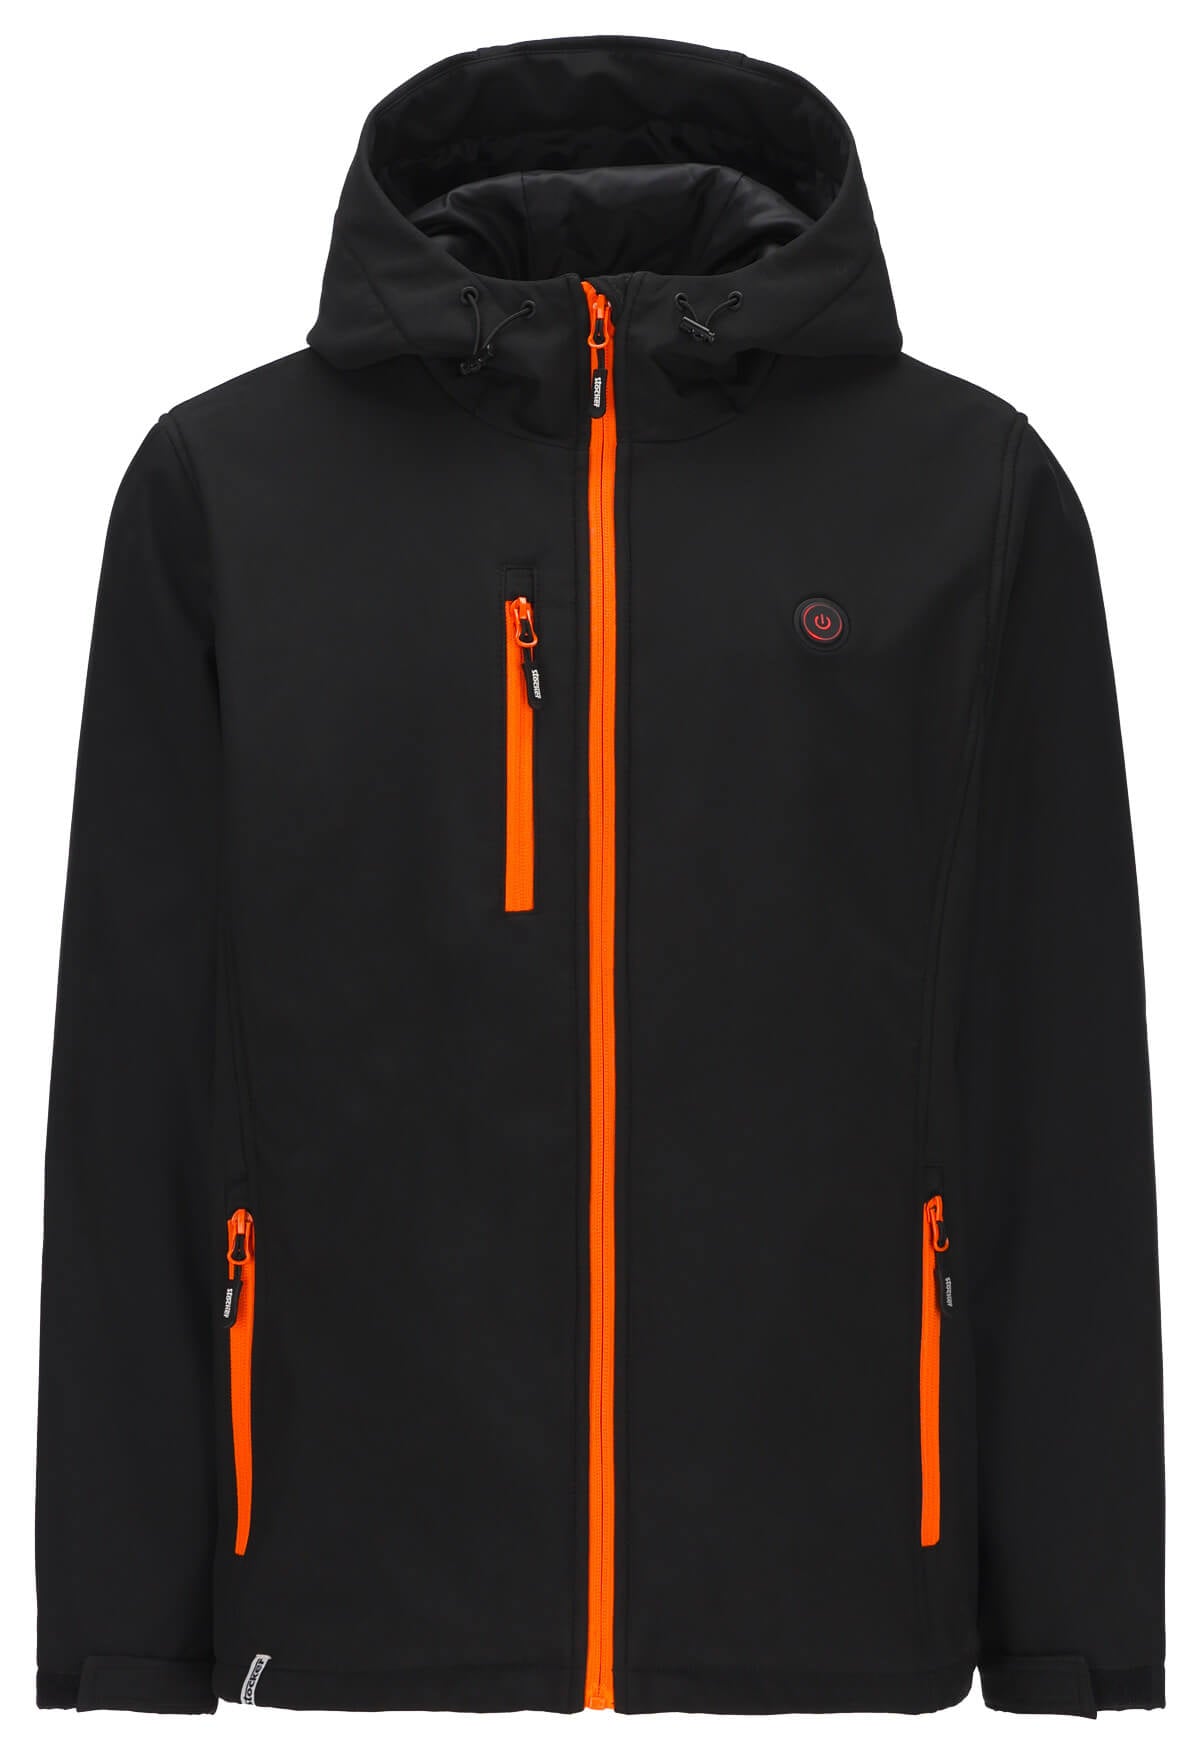 Nuclor Giacca Softshell Riscaldabile M Stocker